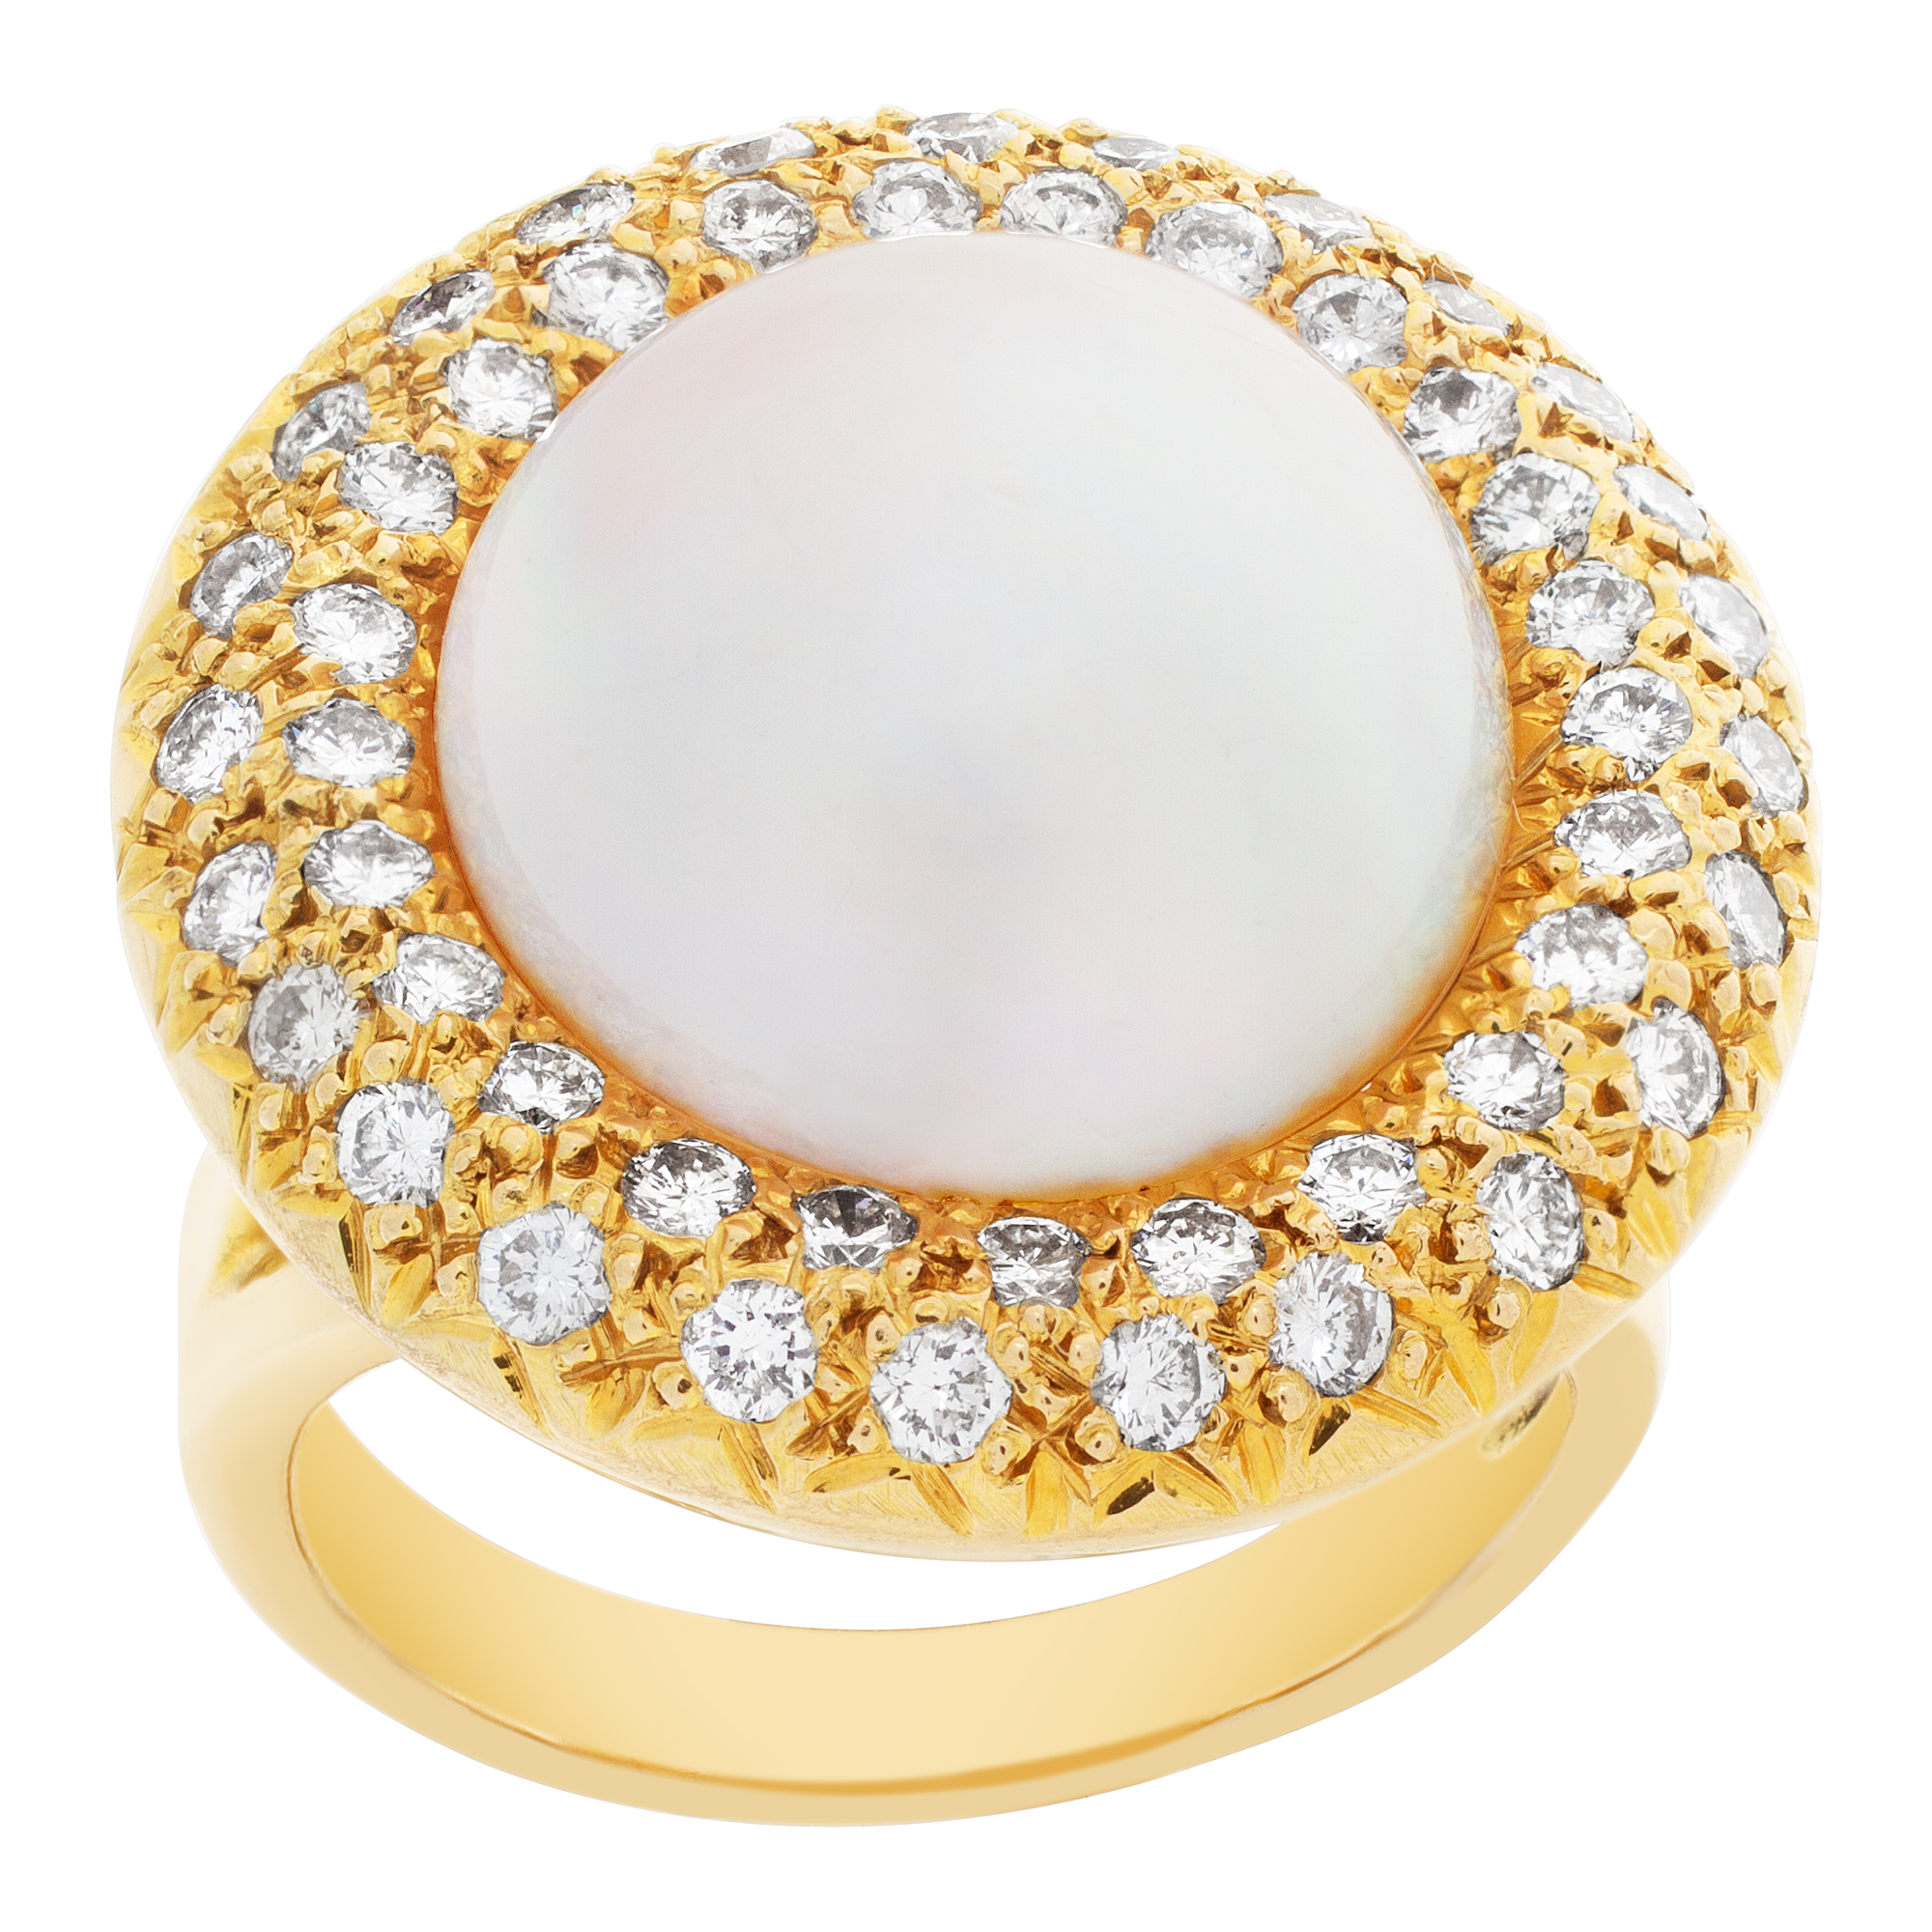 Mabe pearl ring with full cut round brilliant HAlo diamonds set in 14Kt yellow gold